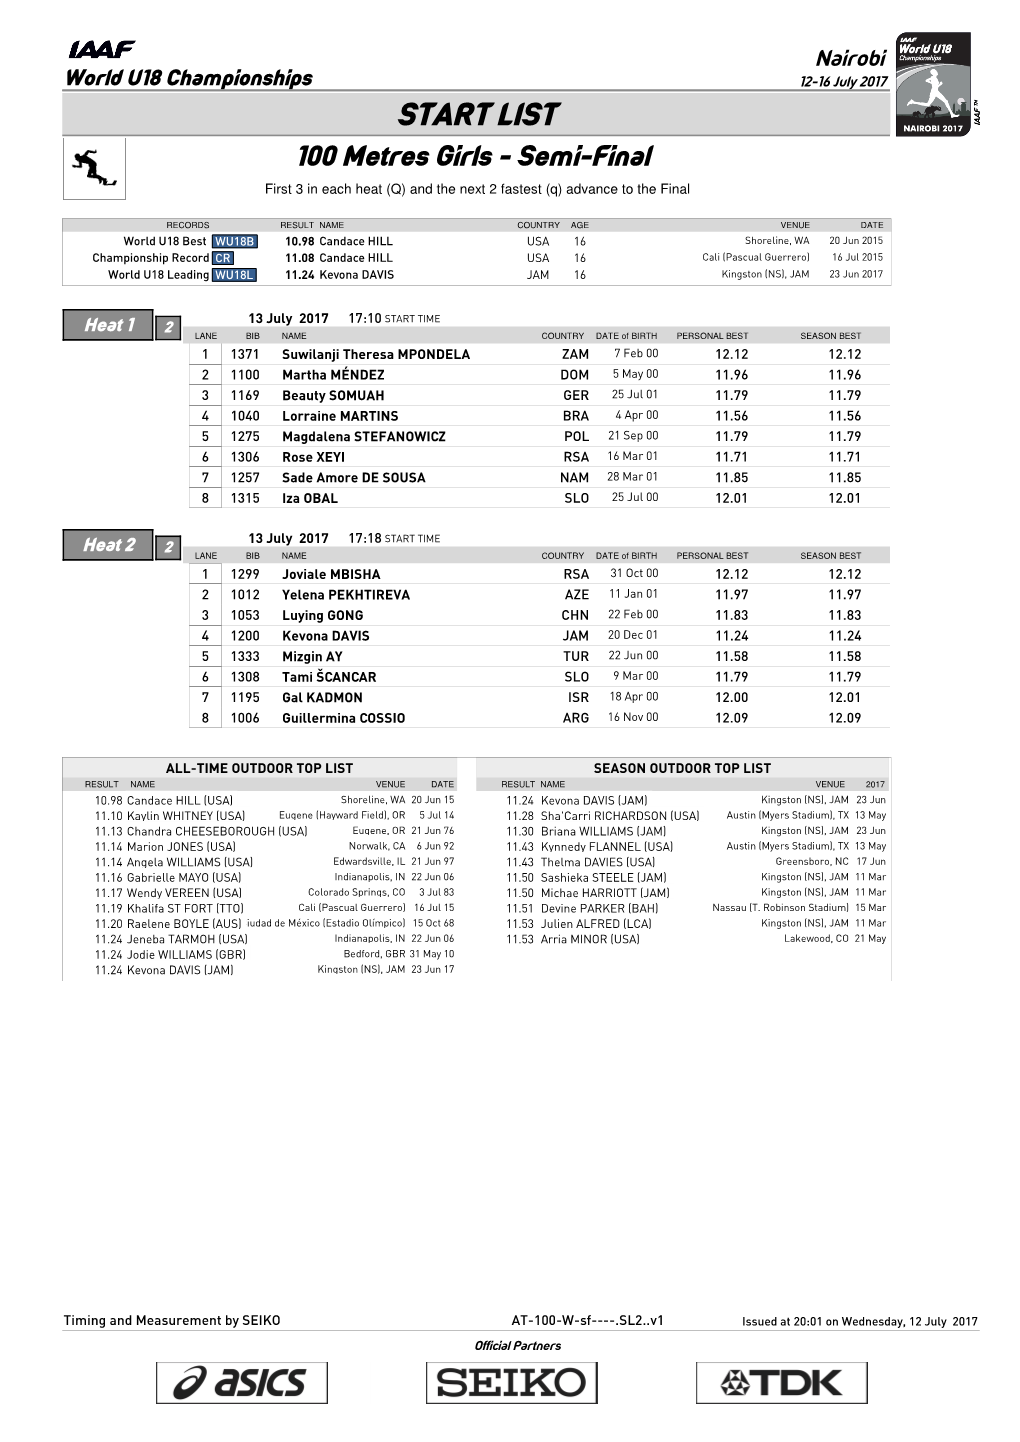 START LIST 100 Metres Girls - Semi-Final First 3 in Each Heat (Q) and the Next 2 Fastest (Q) Advance to the Final